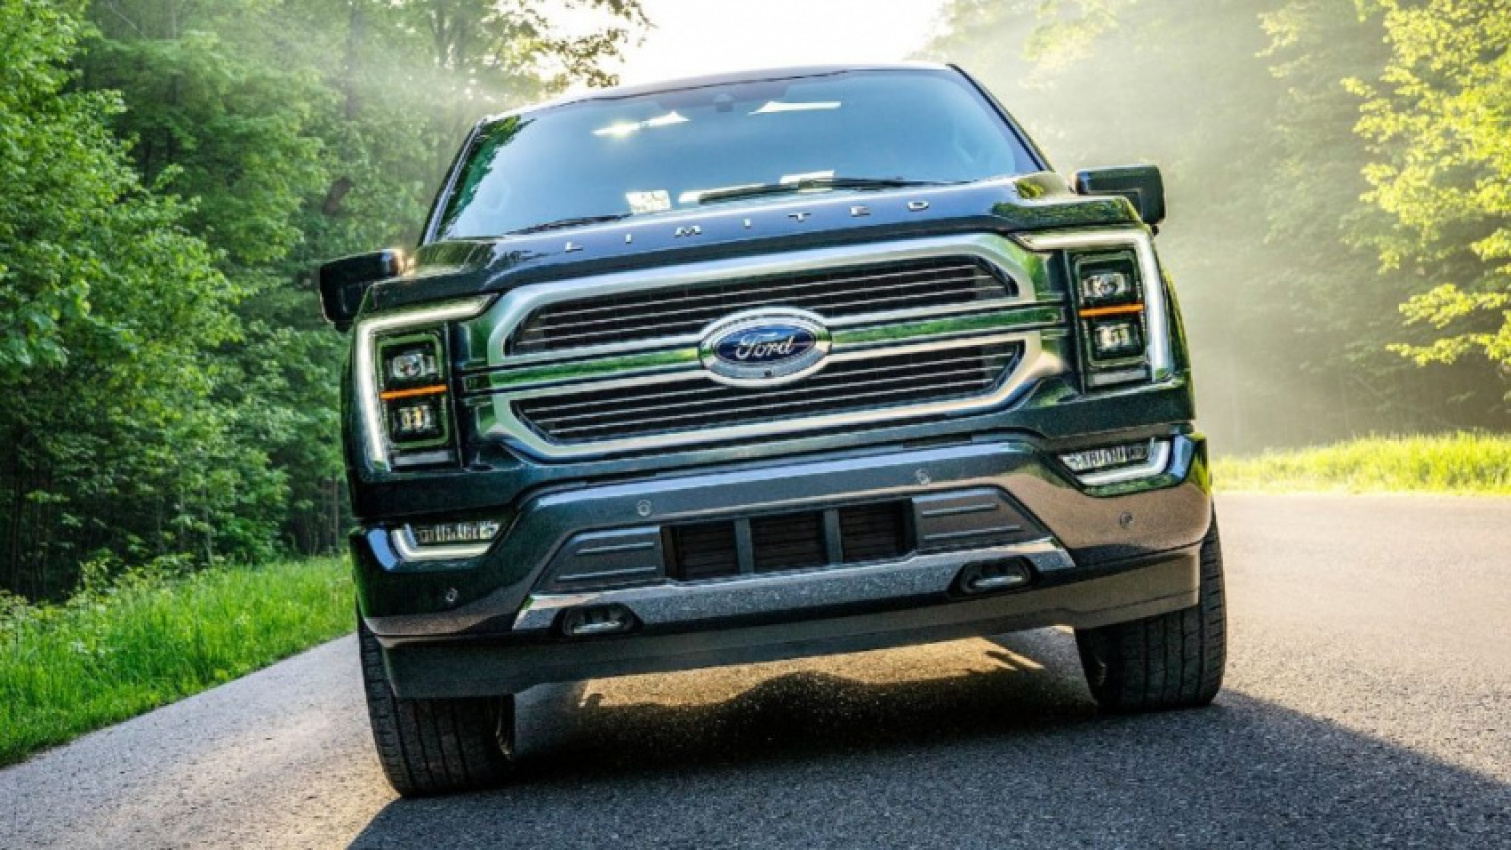 autos, cars, ford, ram, f-150, ford f-150, ram 1500, trucks, the 2022 ford f-150 is a “far cry” from the 2022 ram 1500